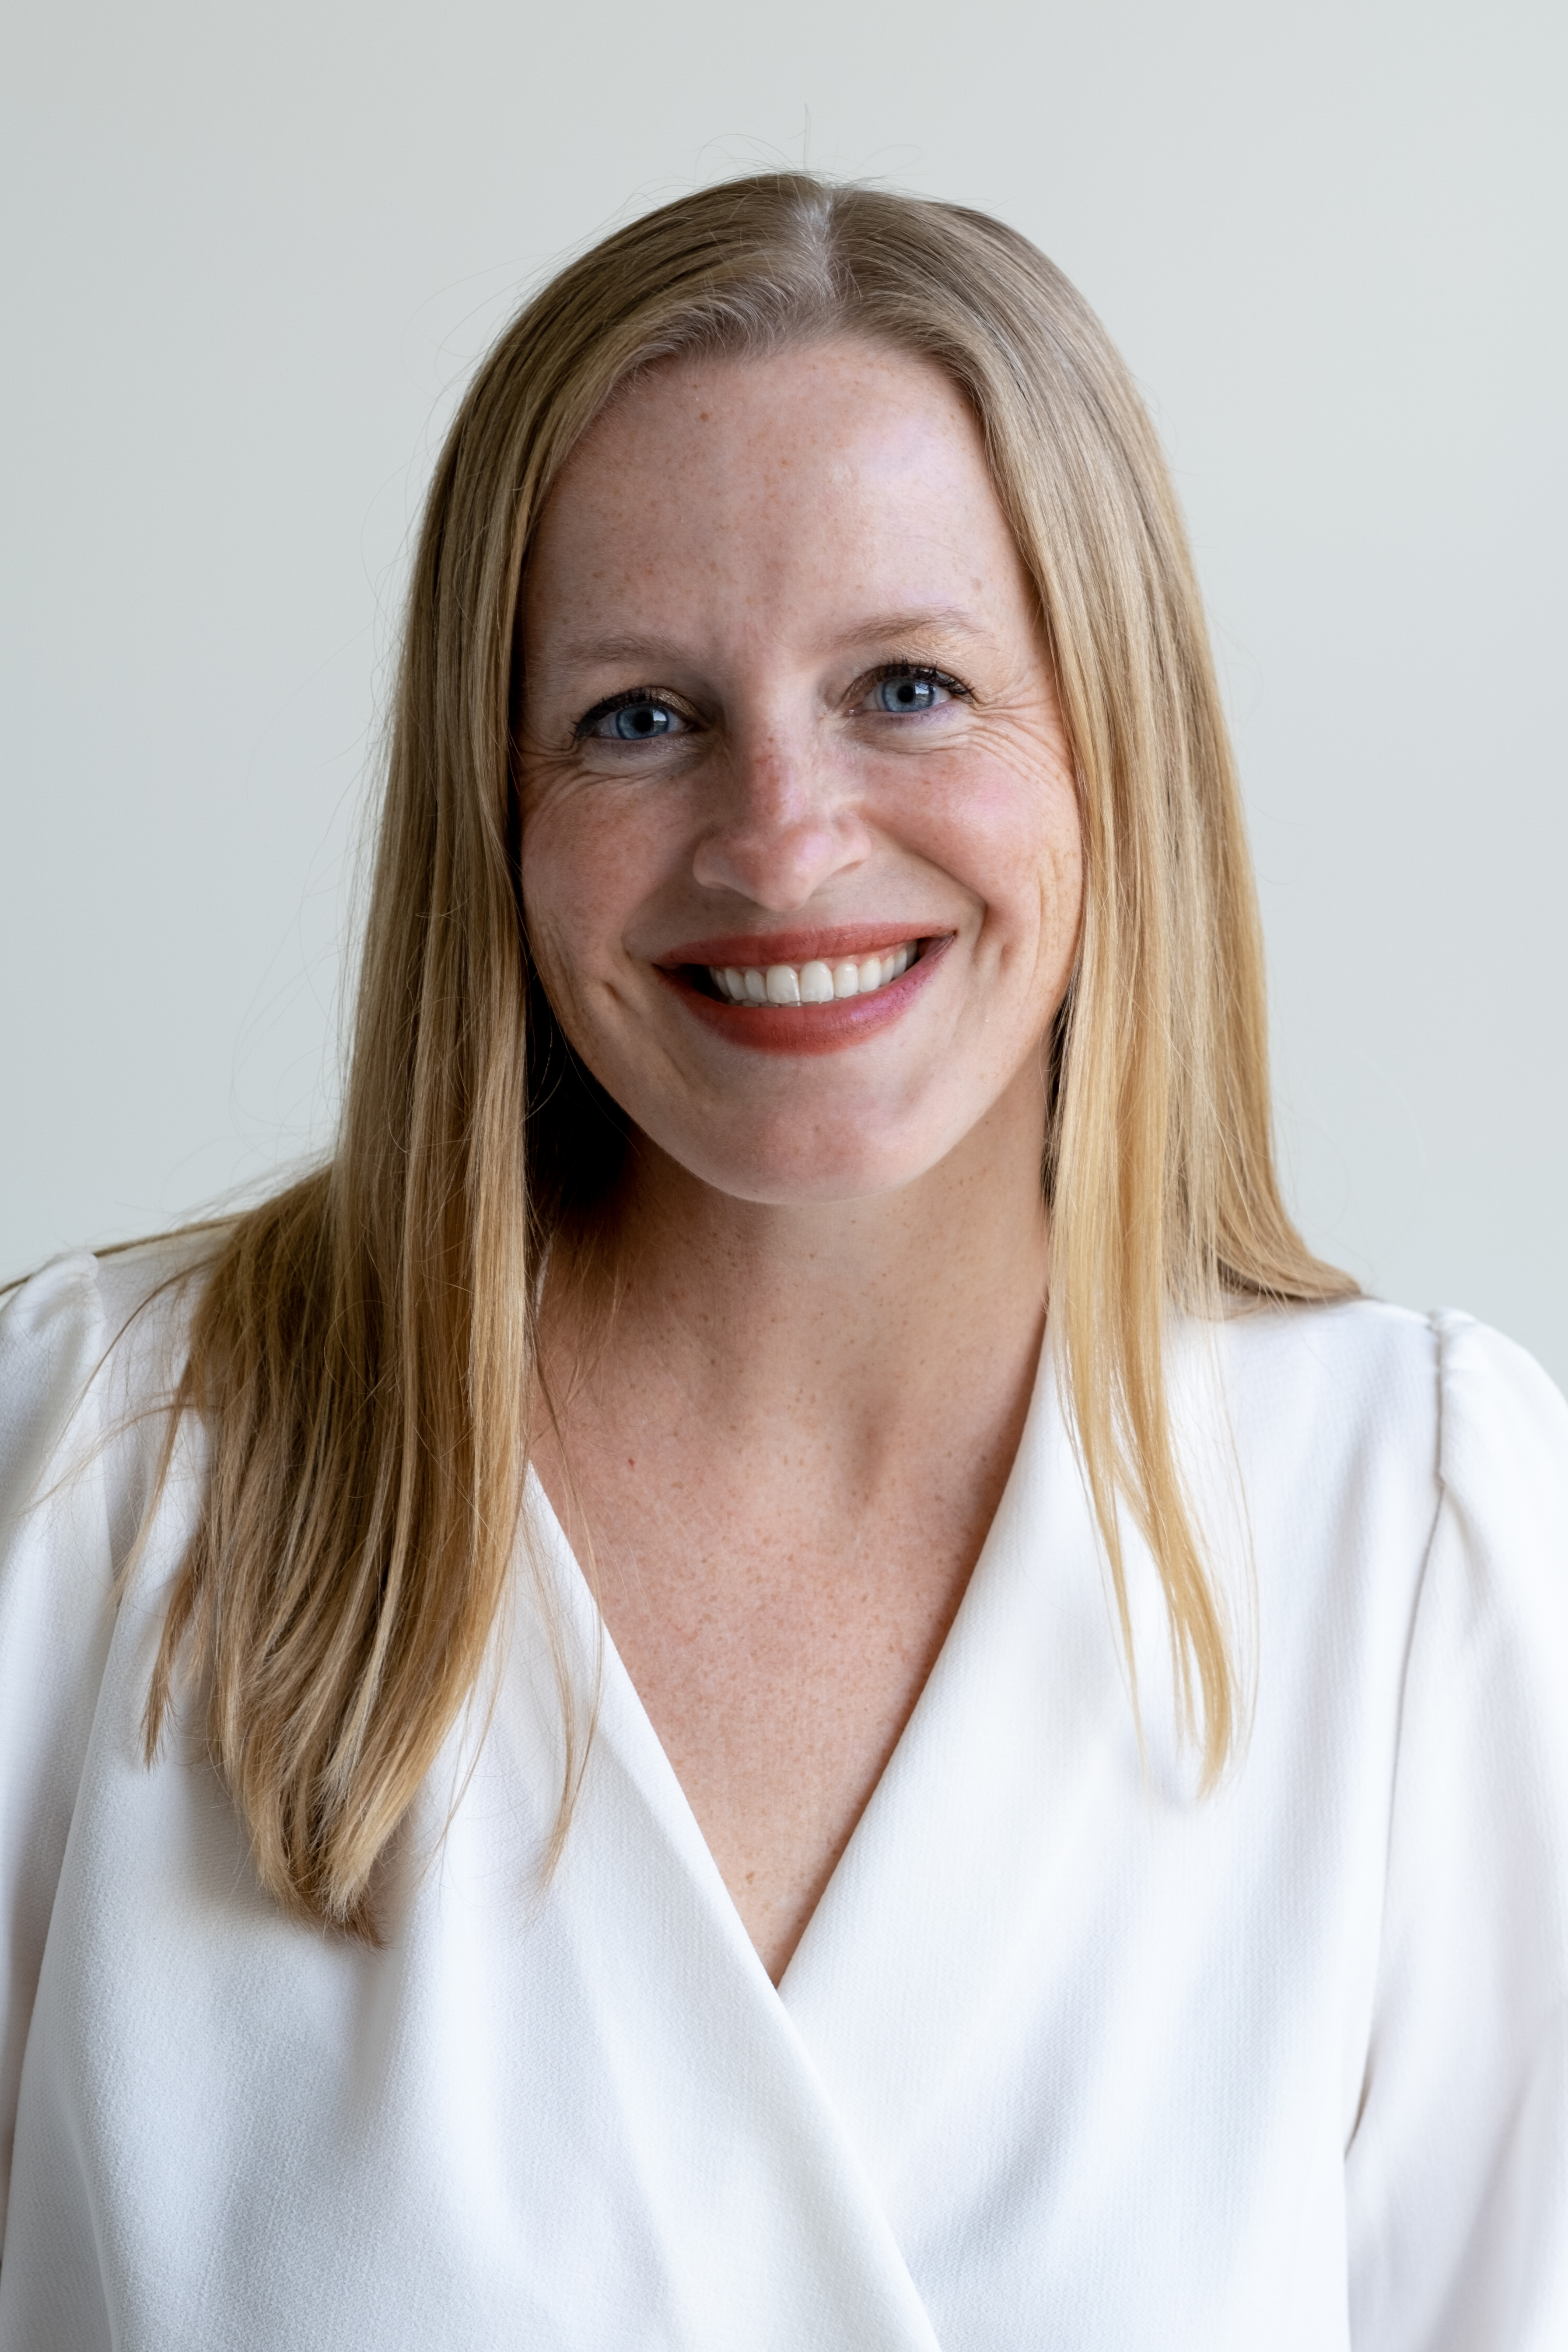 The Honest Company Announces Appointment of Kate Barton as Chief Growth Officer